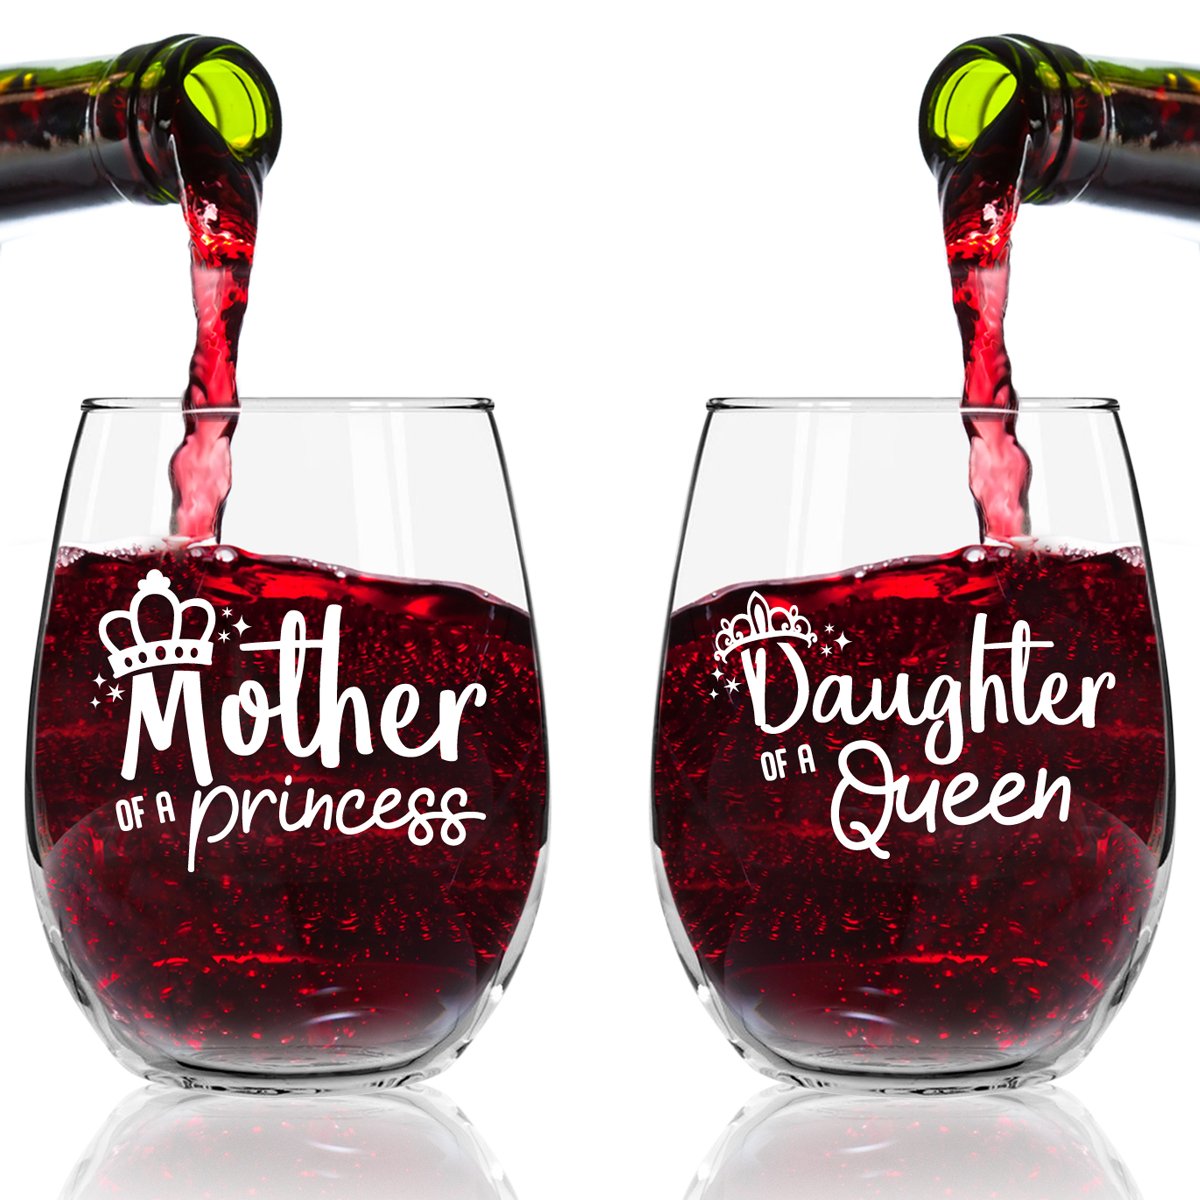 Mother of A Princess Daughter of A Queen Stemless Wine Glass Set of 2 (15 oz)- Wine Glasses for Cute Gift for Mom From Daughter- Mother Daughter Matching Gifts Idea- Mom Gift for Birthday